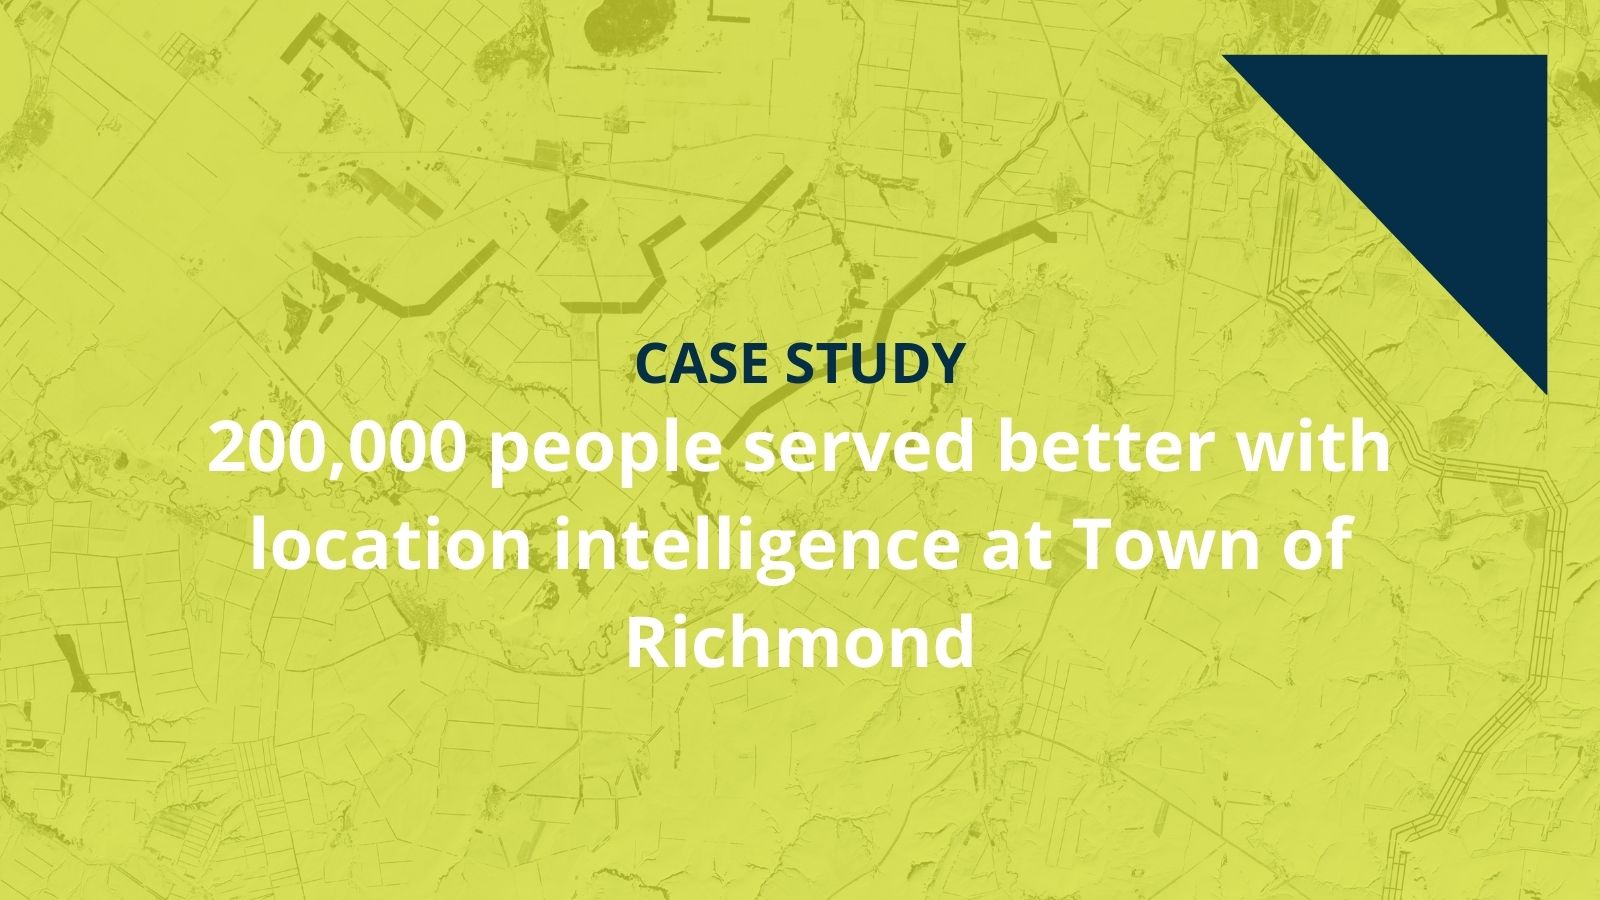 200,000 people served better with location intelligence superimposed over image of a map sketch